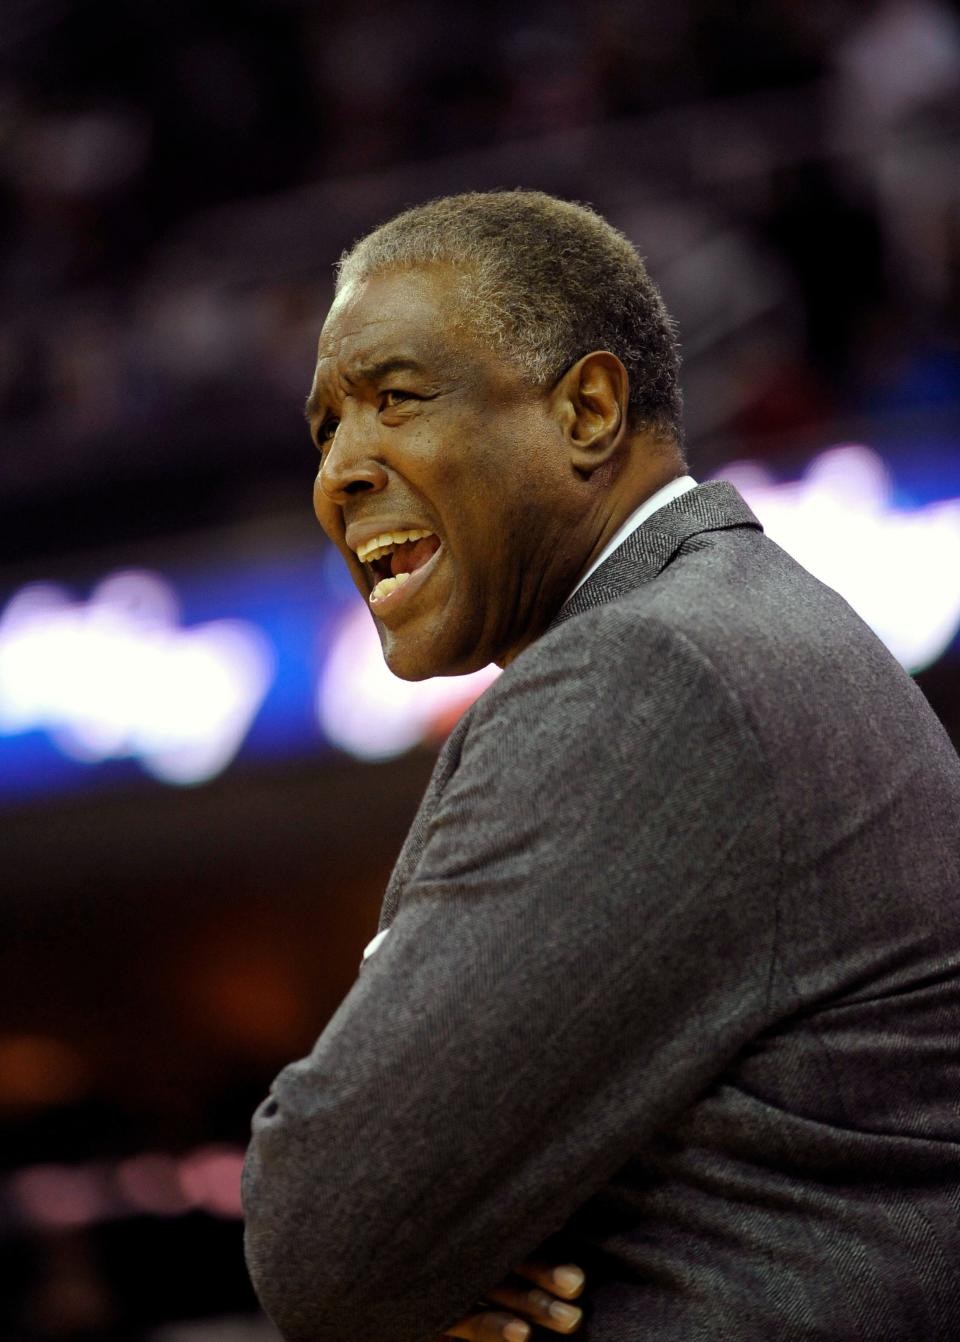 The Cleveland Cavaliers were 34-30 when they fired coach Paul Silas in 2005.